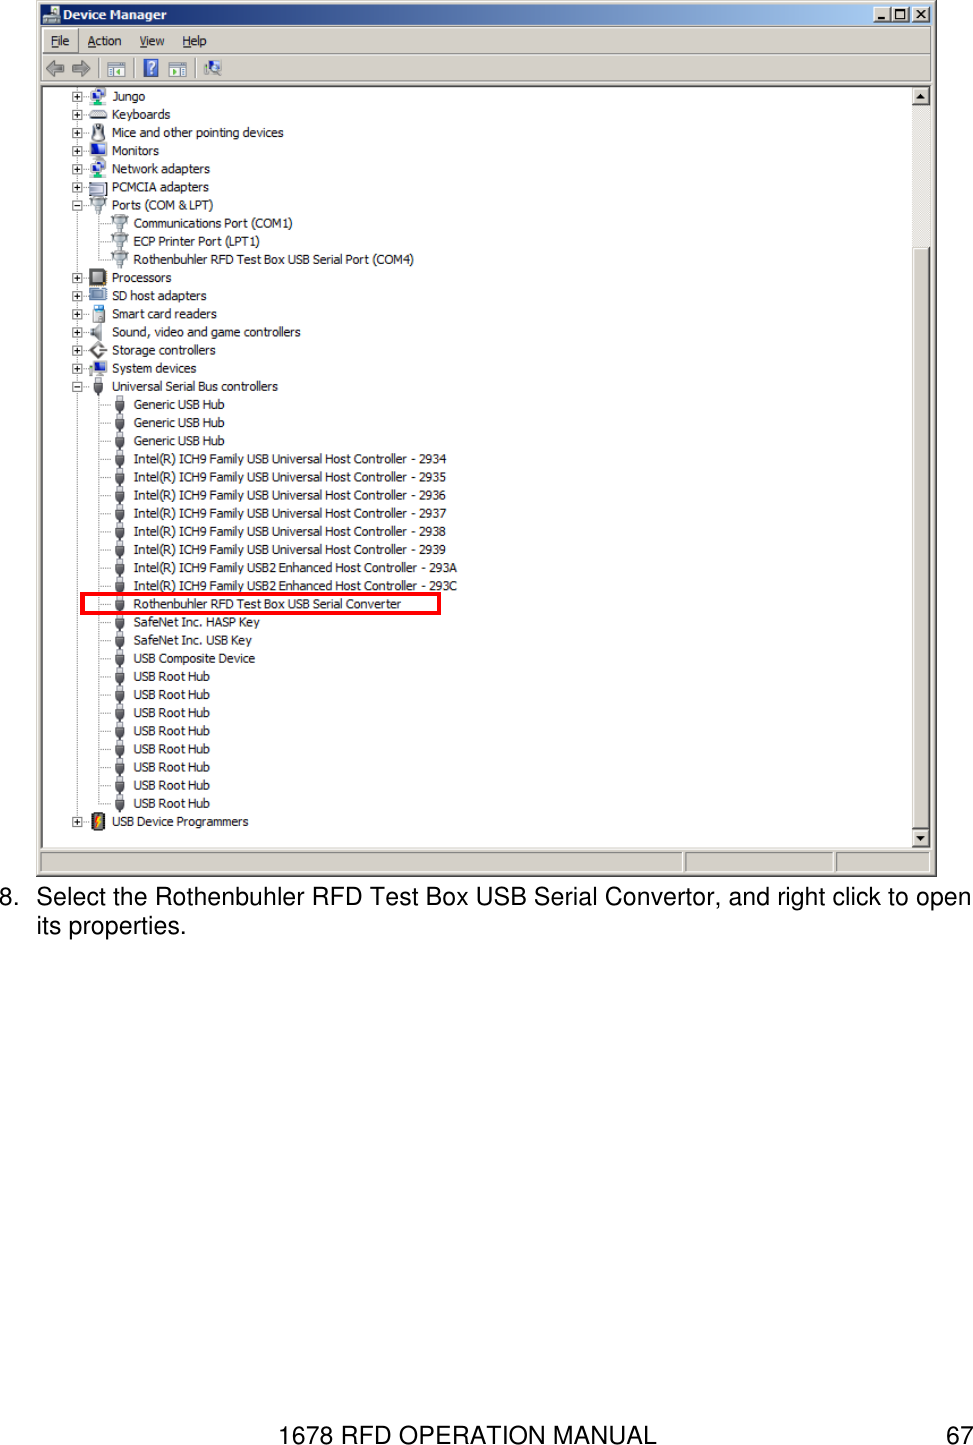 1678 RFD OPERATION MANUAL  67  8.  Select the Rothenbuhler RFD Test Box USB Serial Convertor, and right click to open its properties. 